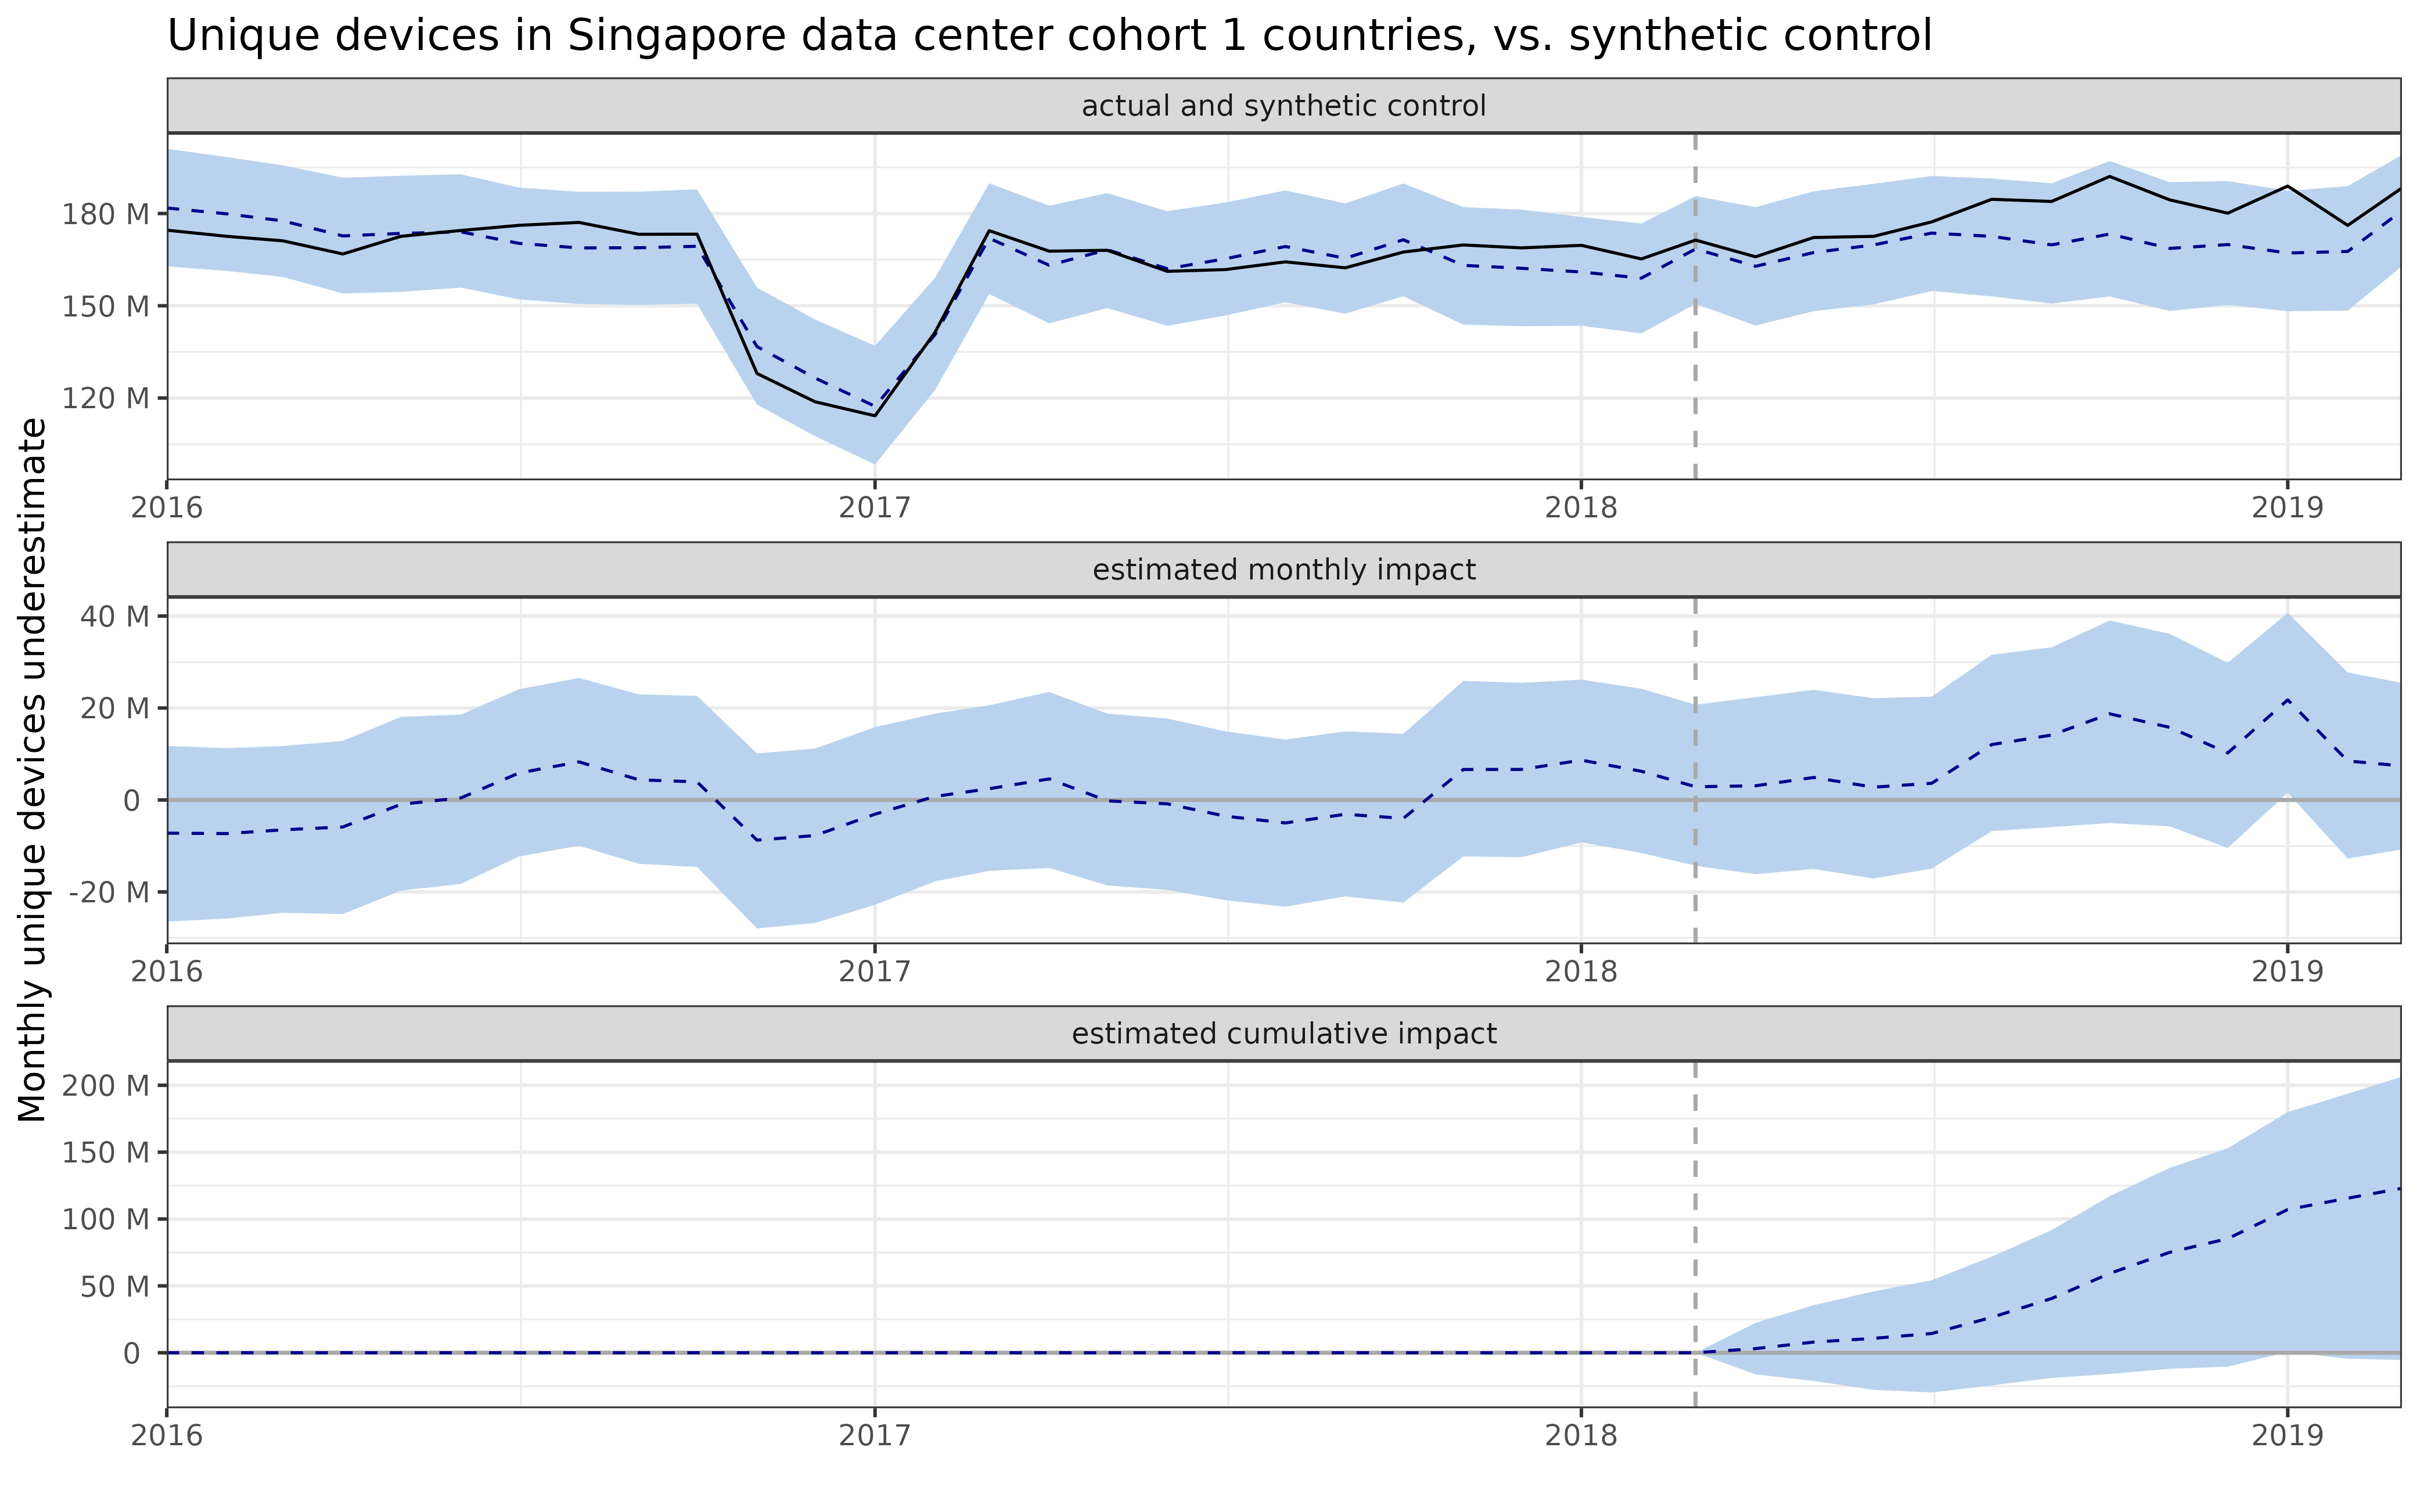 A CausalImpact plot showing the estimated impact of switching to Singapore on unique devices among cohort 1 countries